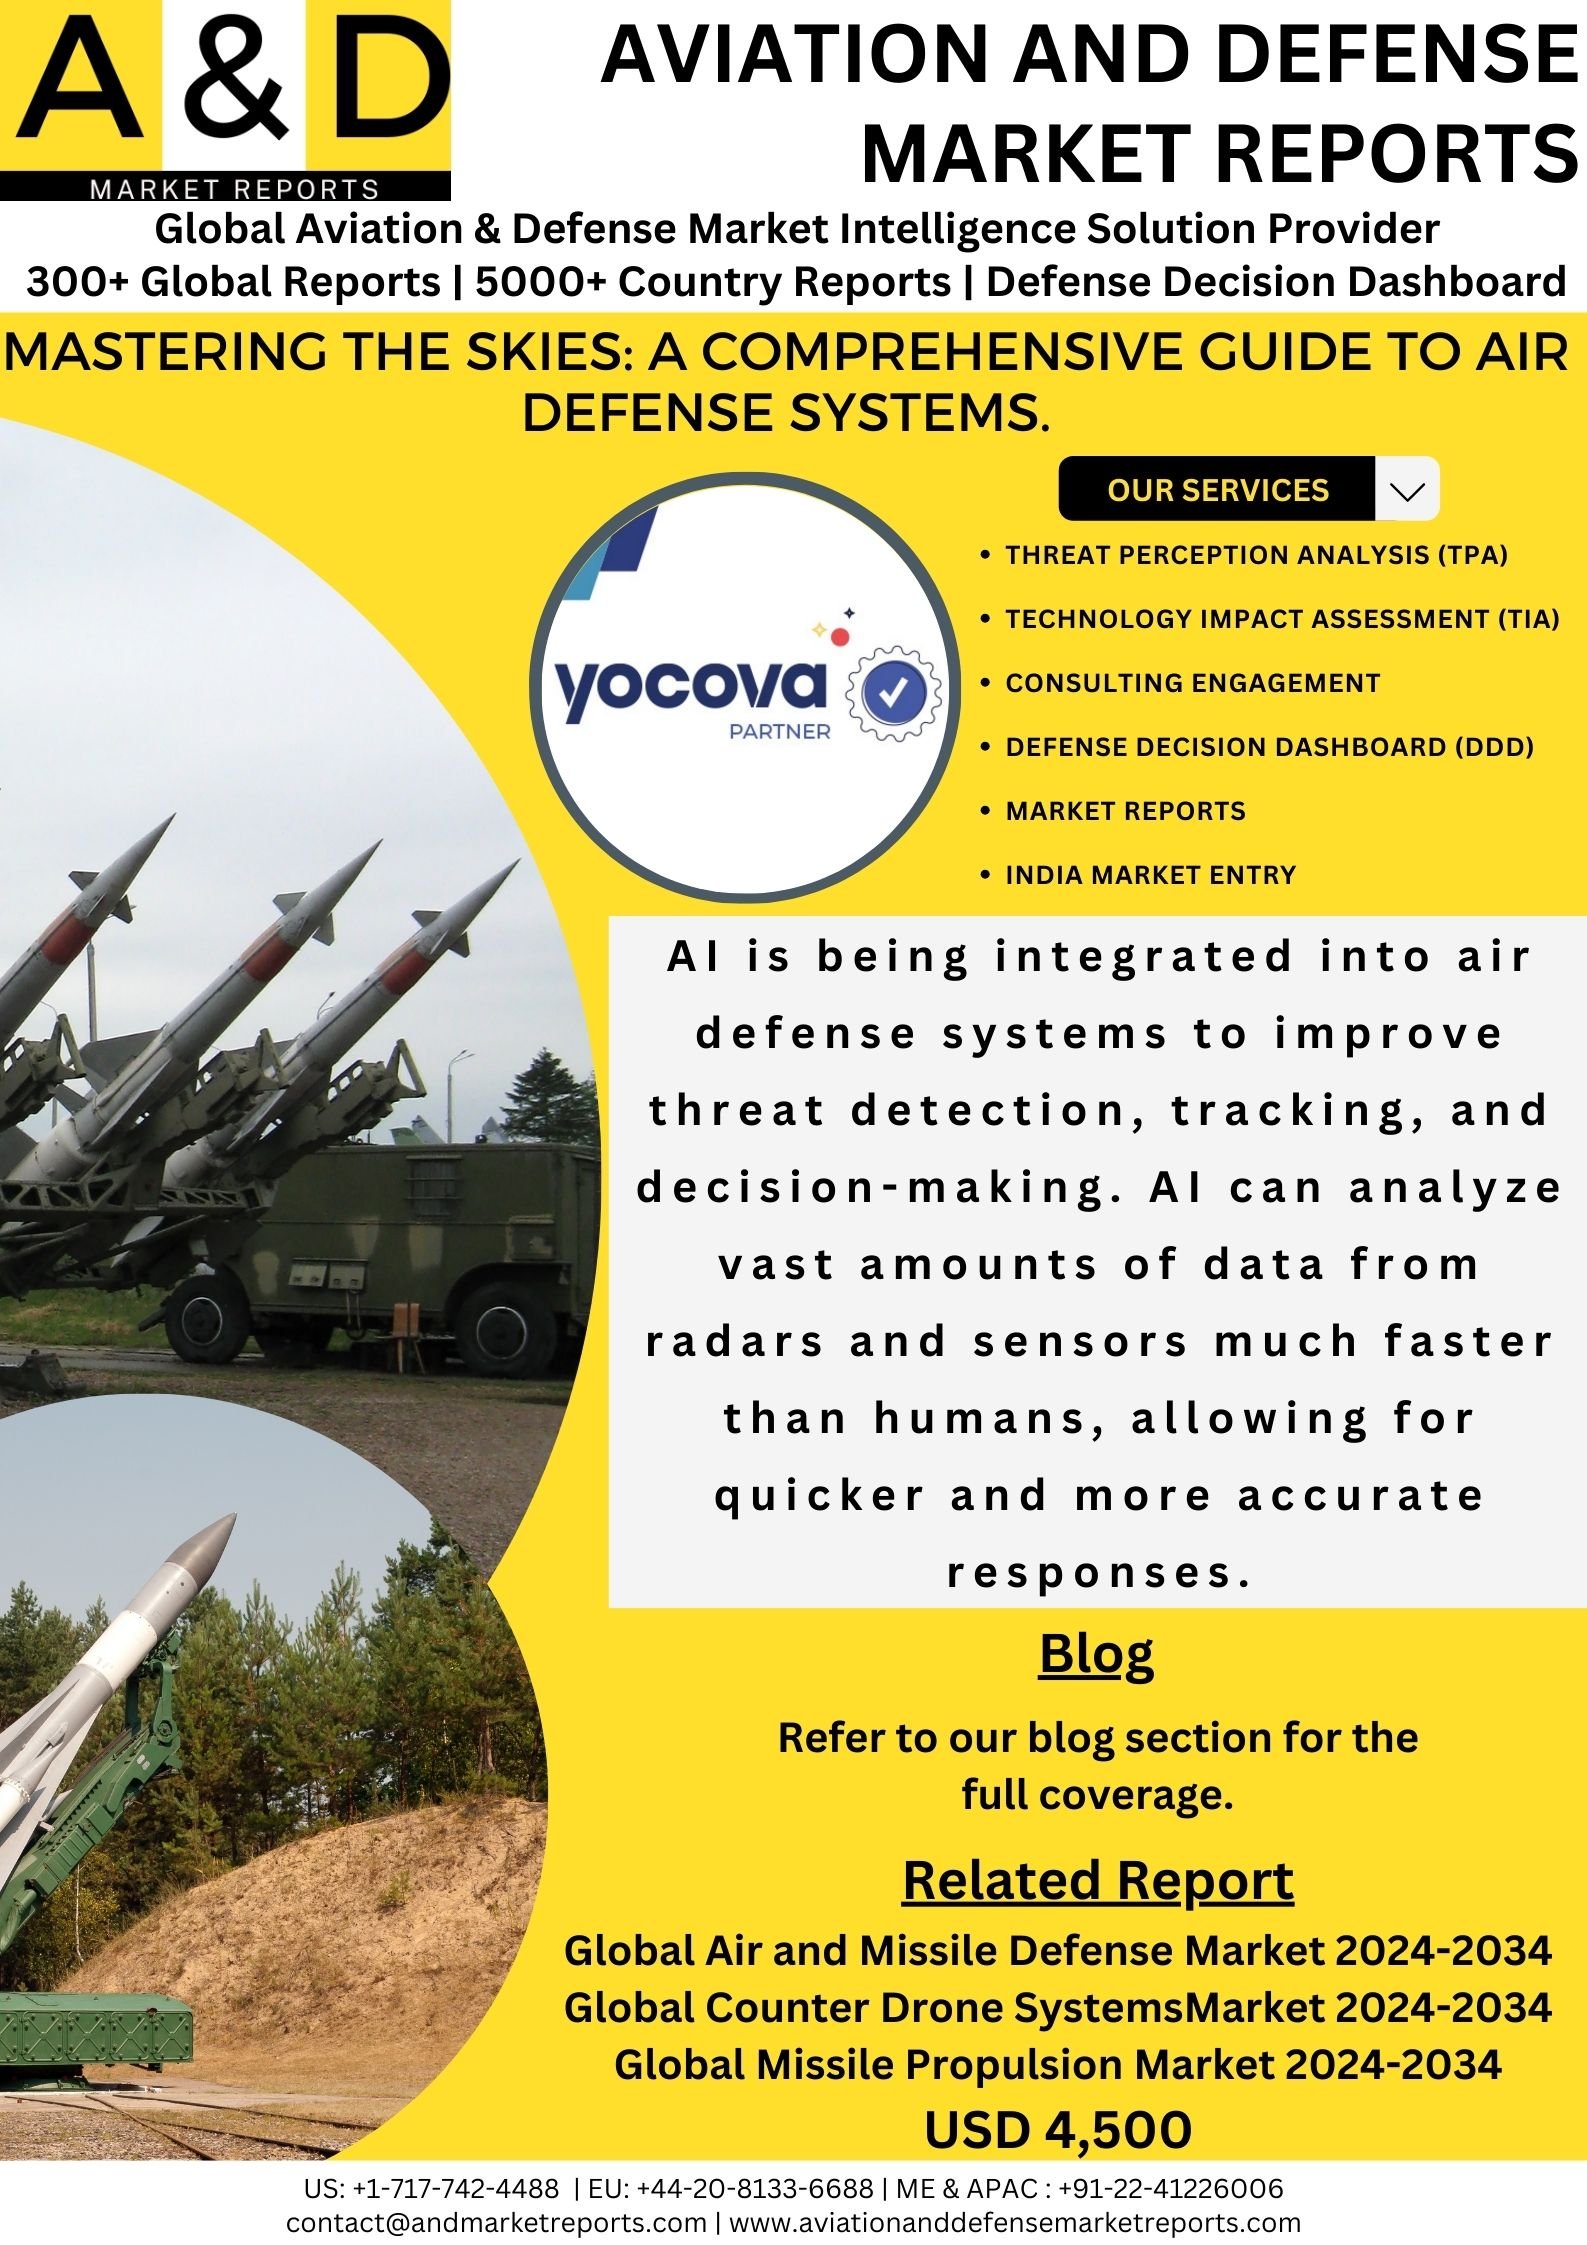 Mastering The Skies: A Comprehensive Guide To Air Defense Systems